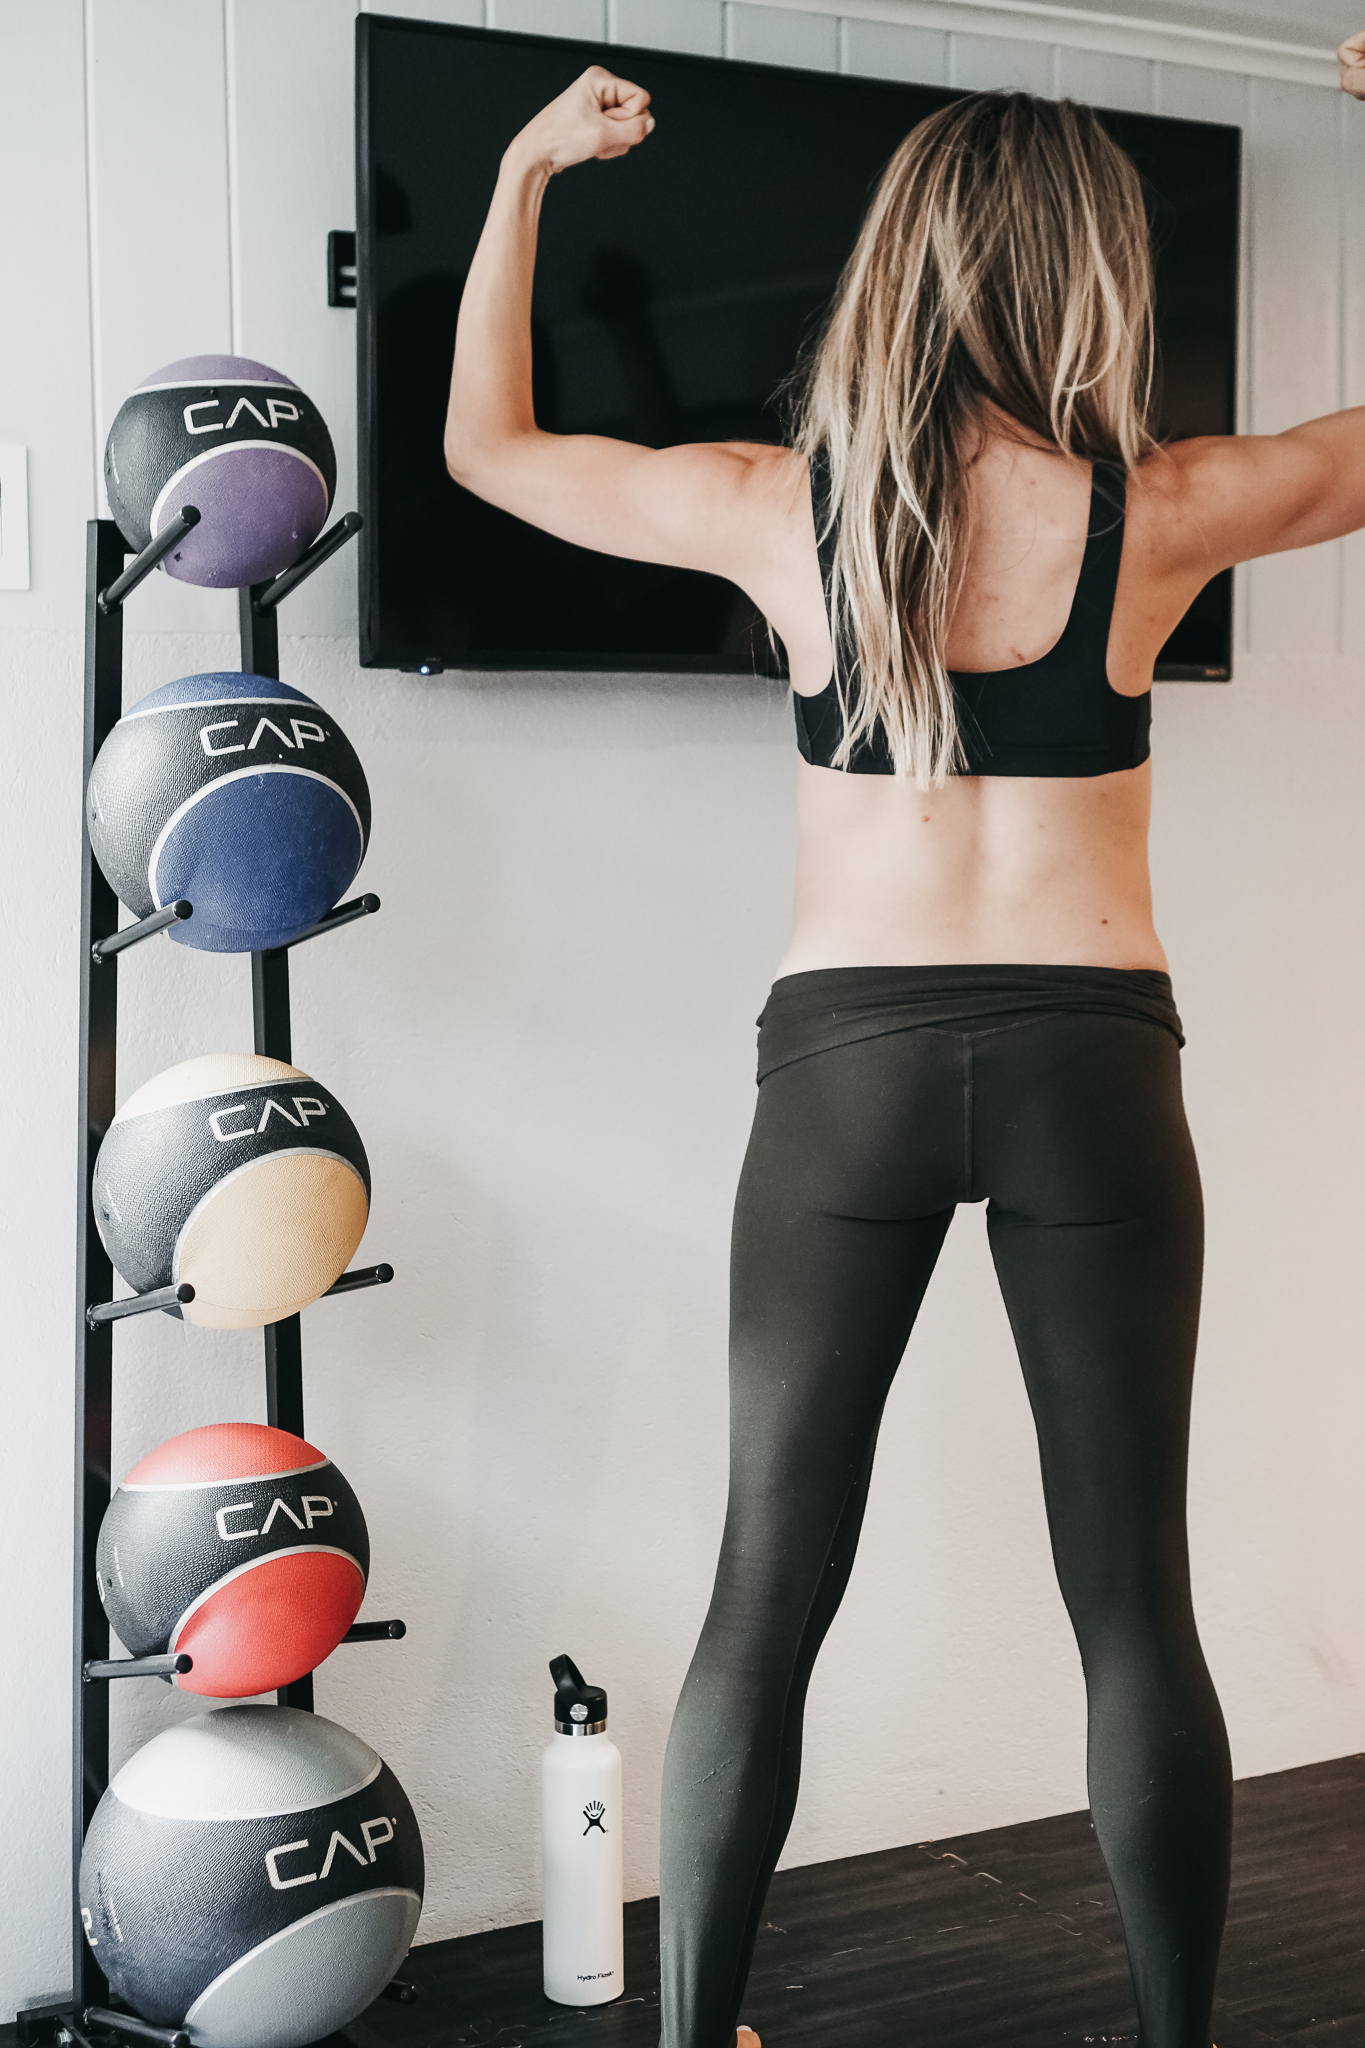 The Grey Edit - Cortney Bigelow - 40 Weeks Pregnant - Baby B - Staying Fit During Pregnancy - Home Gym